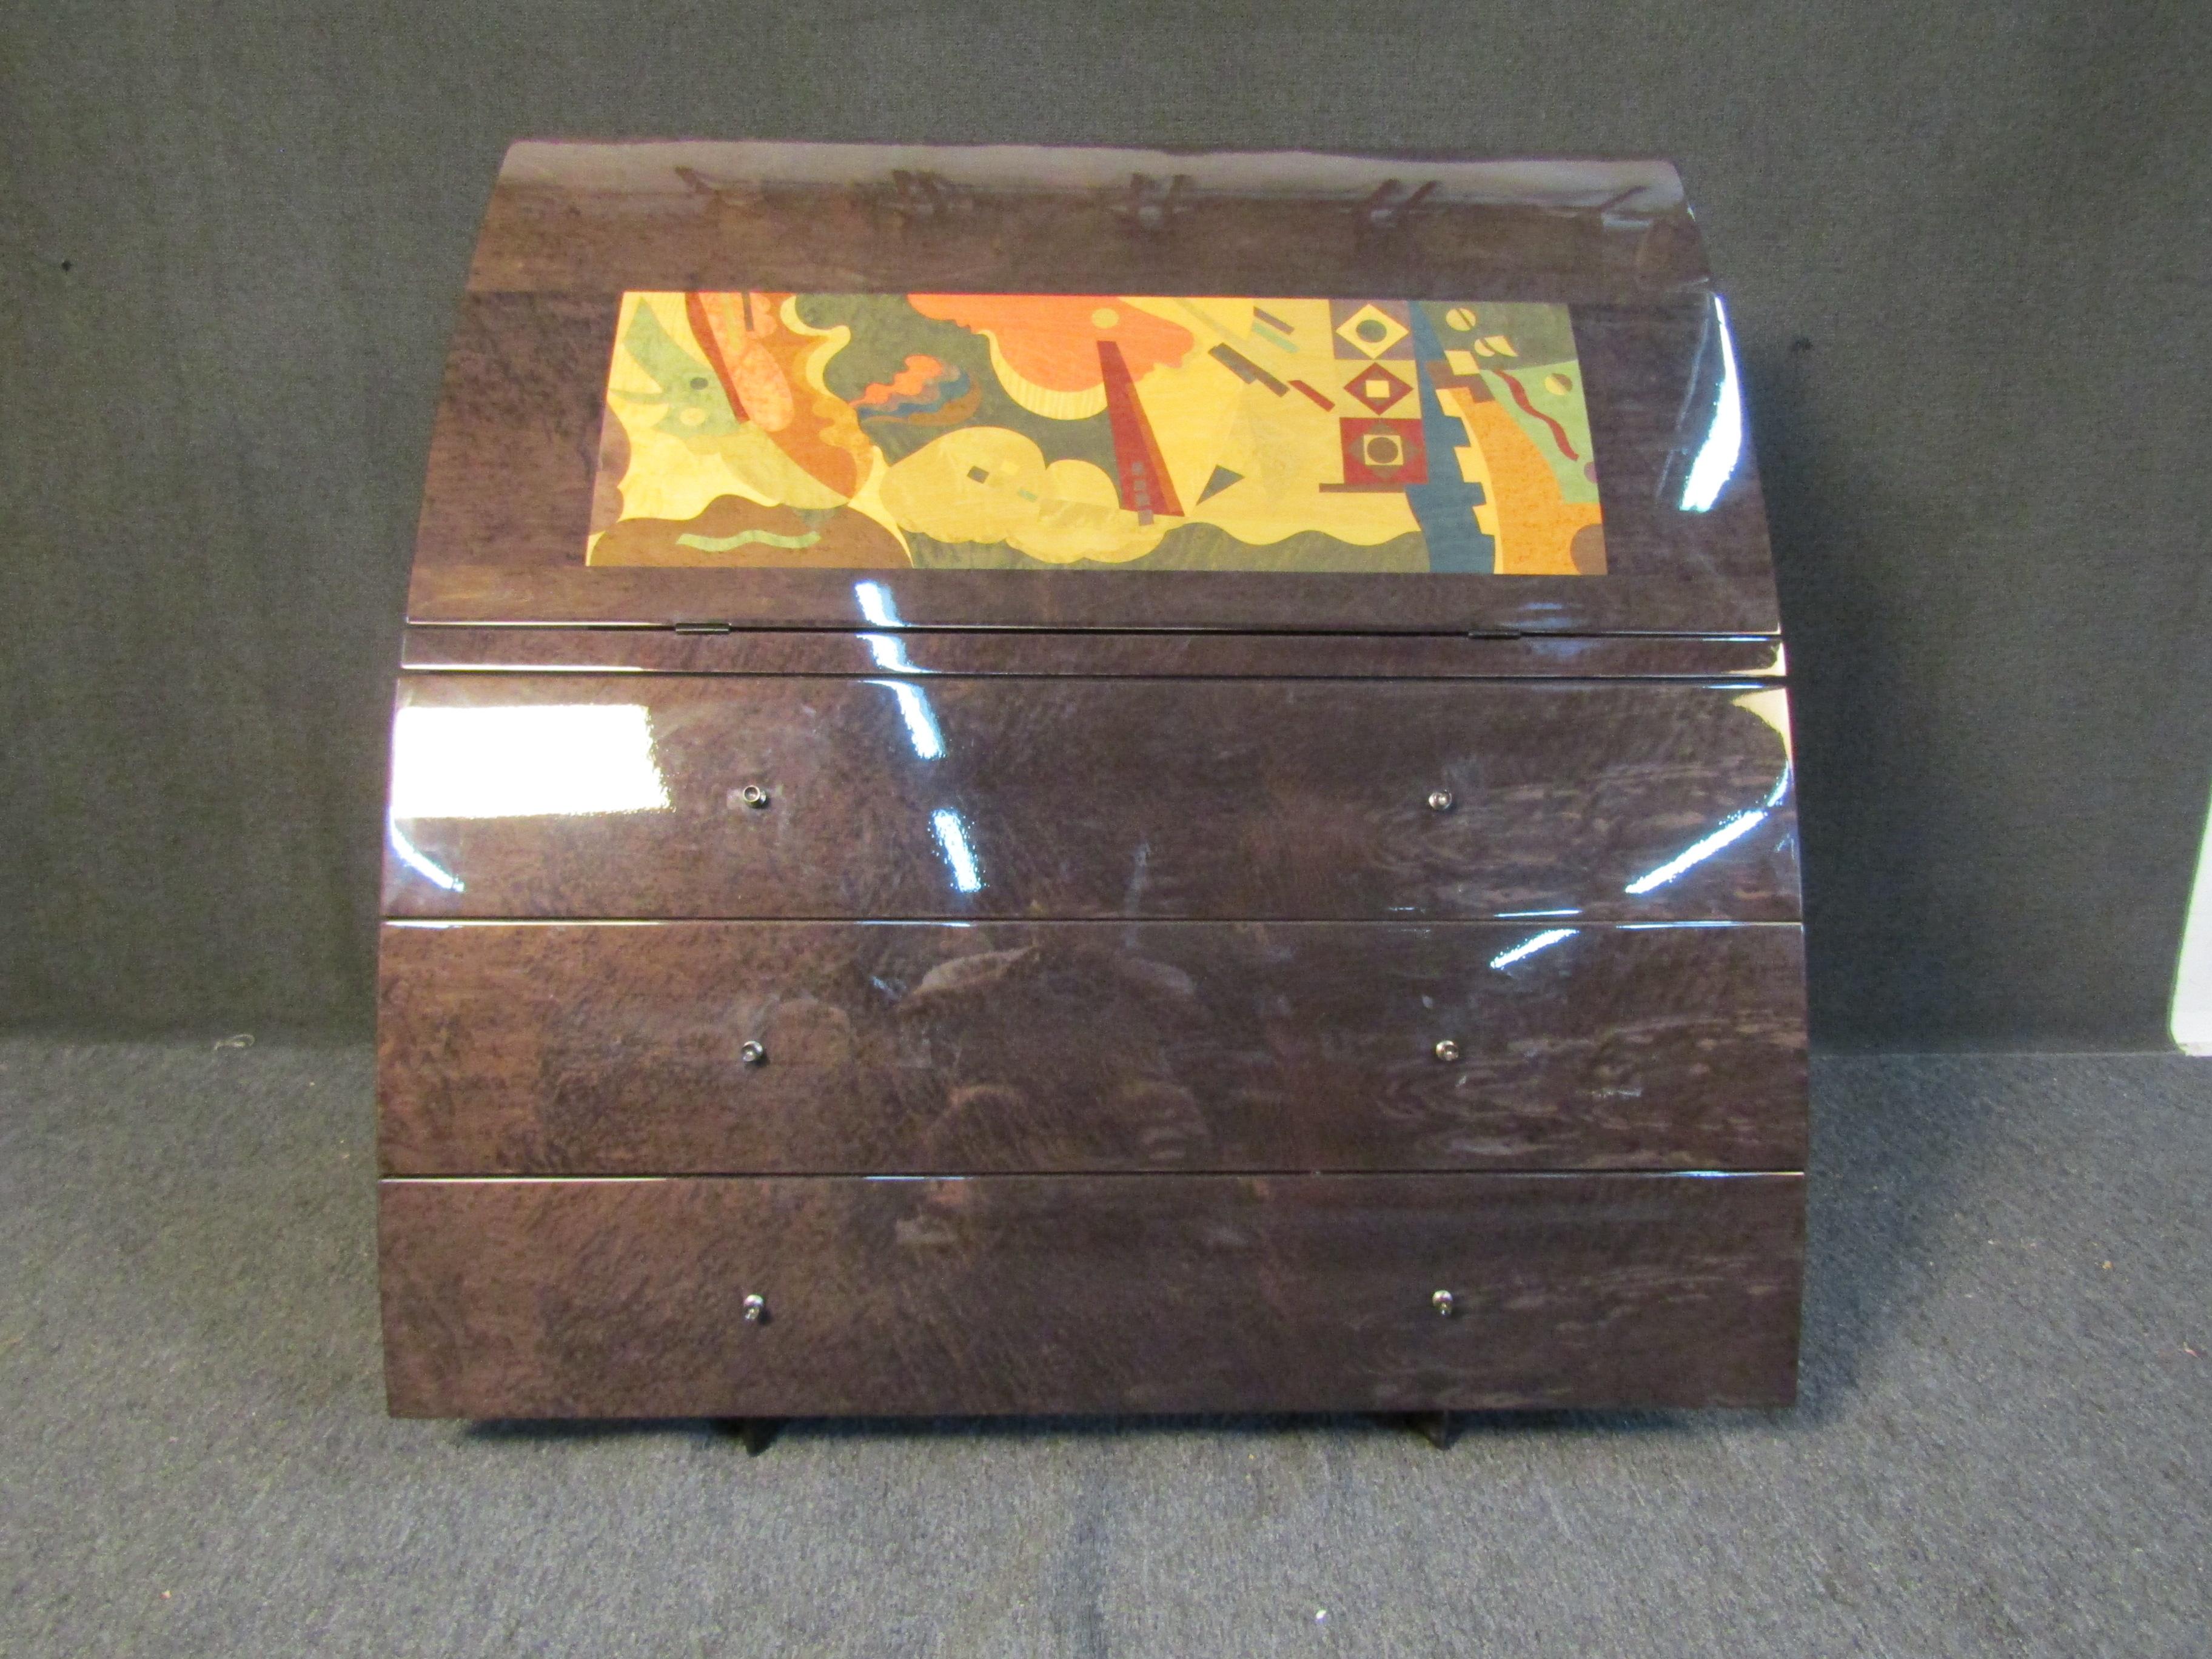 Mid-century style vintage secretary desk adorned with a colorful abstract inlay on the front. Fold down front reveals a large writing surface as well as shelves and drawers for organization. Three large drawers below provide ample room for storage.